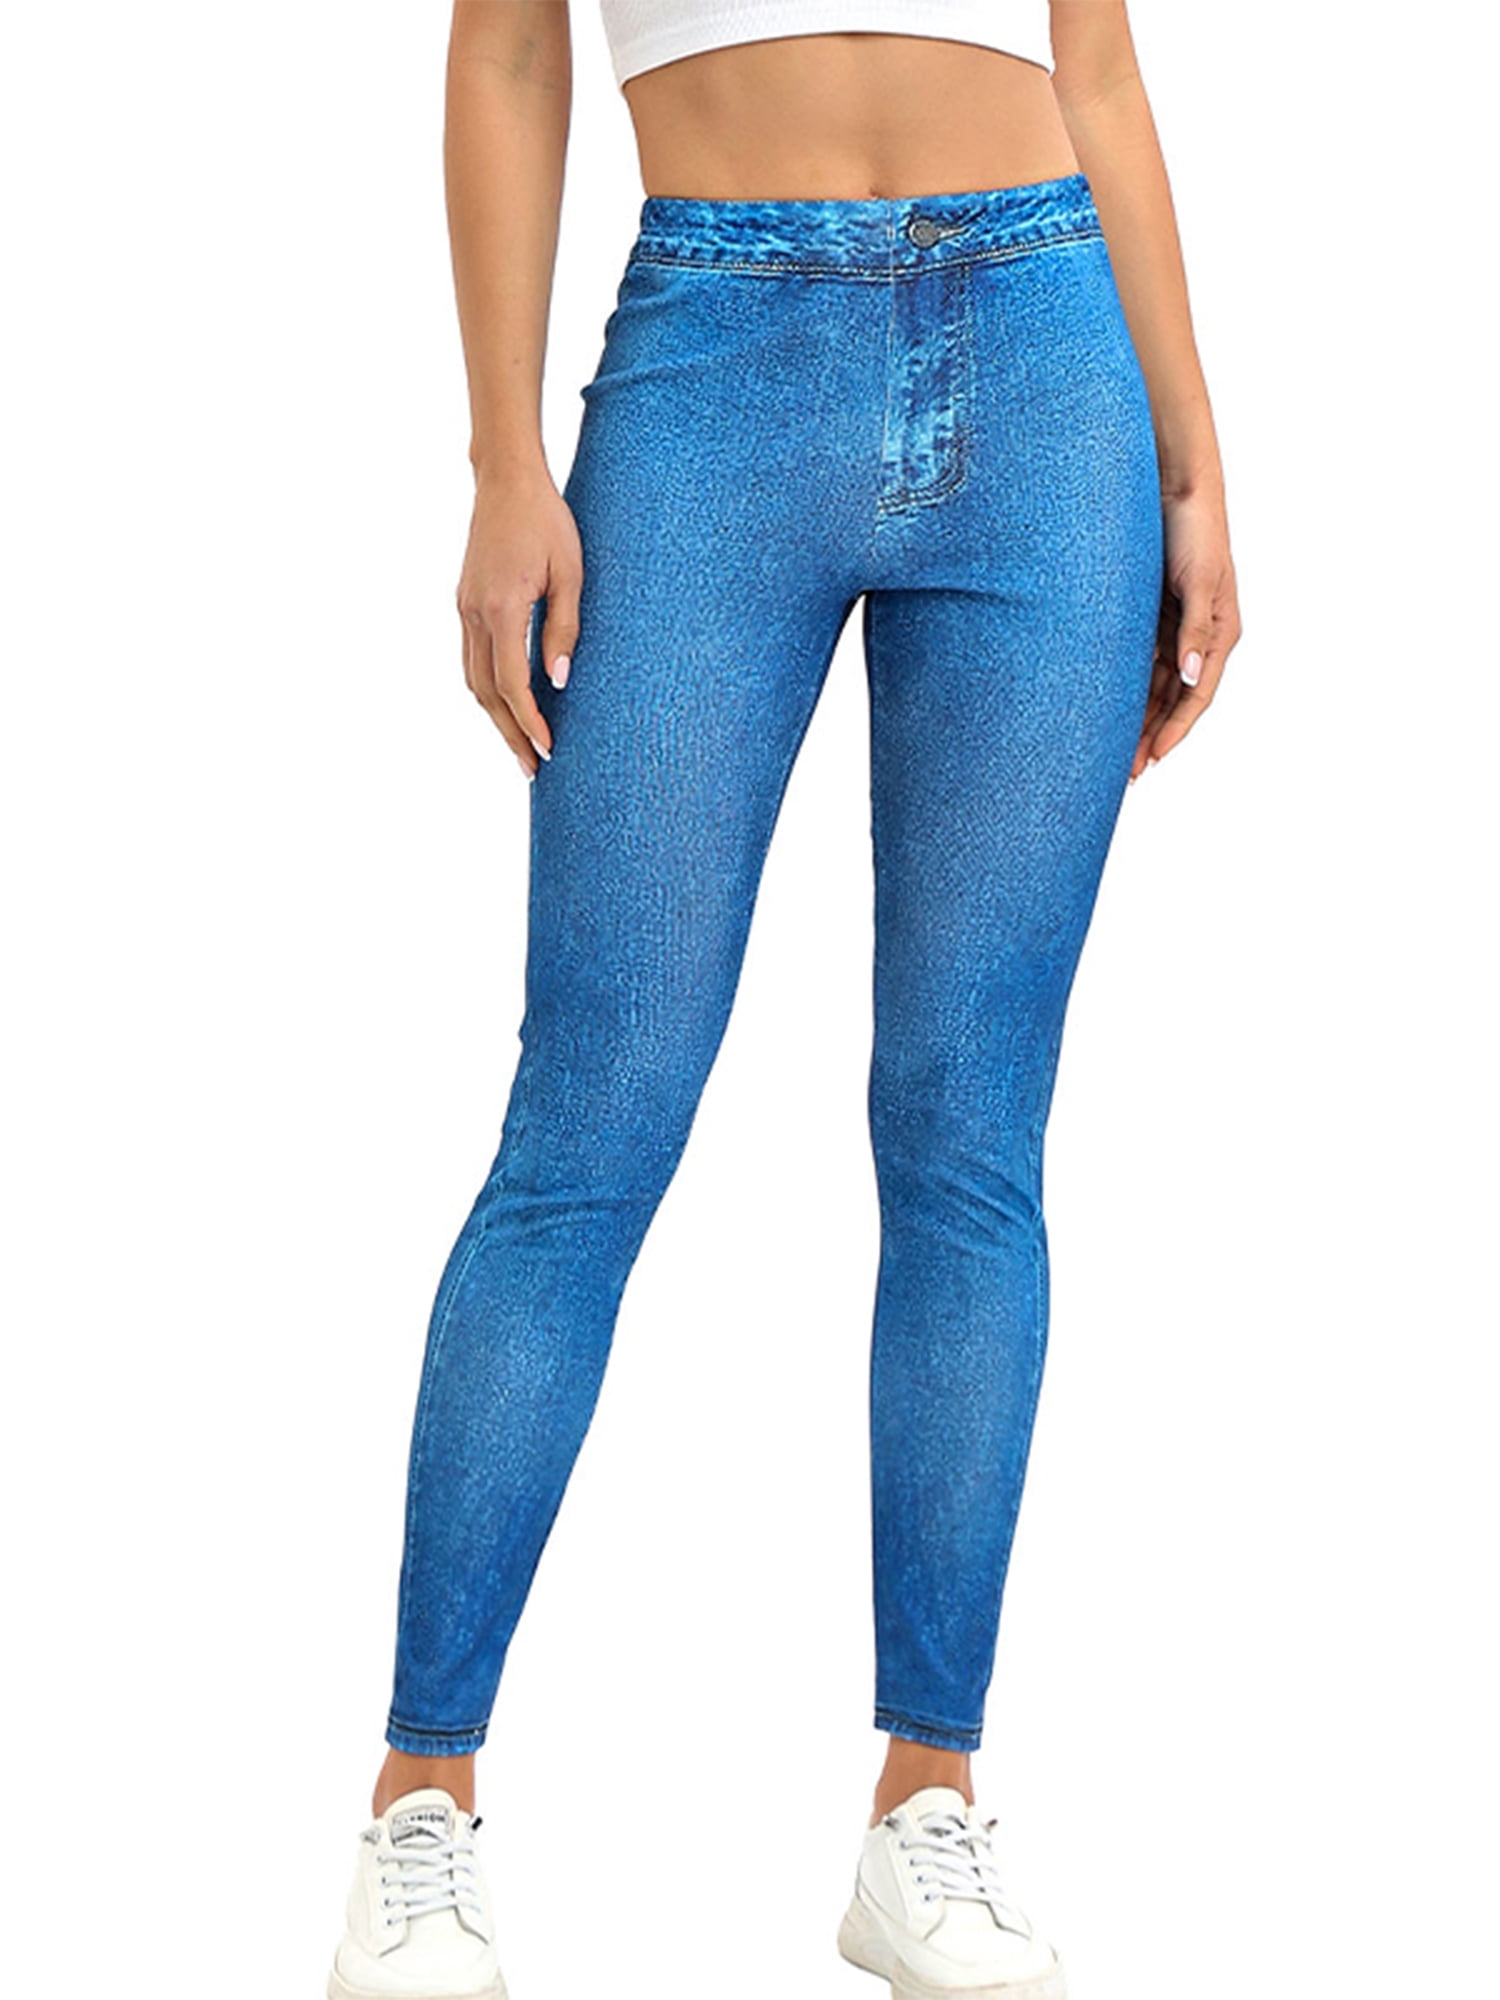 Frontwalk Jean Leggings for Women Printed Denim High Waisted Yoga Pants  Stretch Jean Look Jeggings Tights Blue-A M